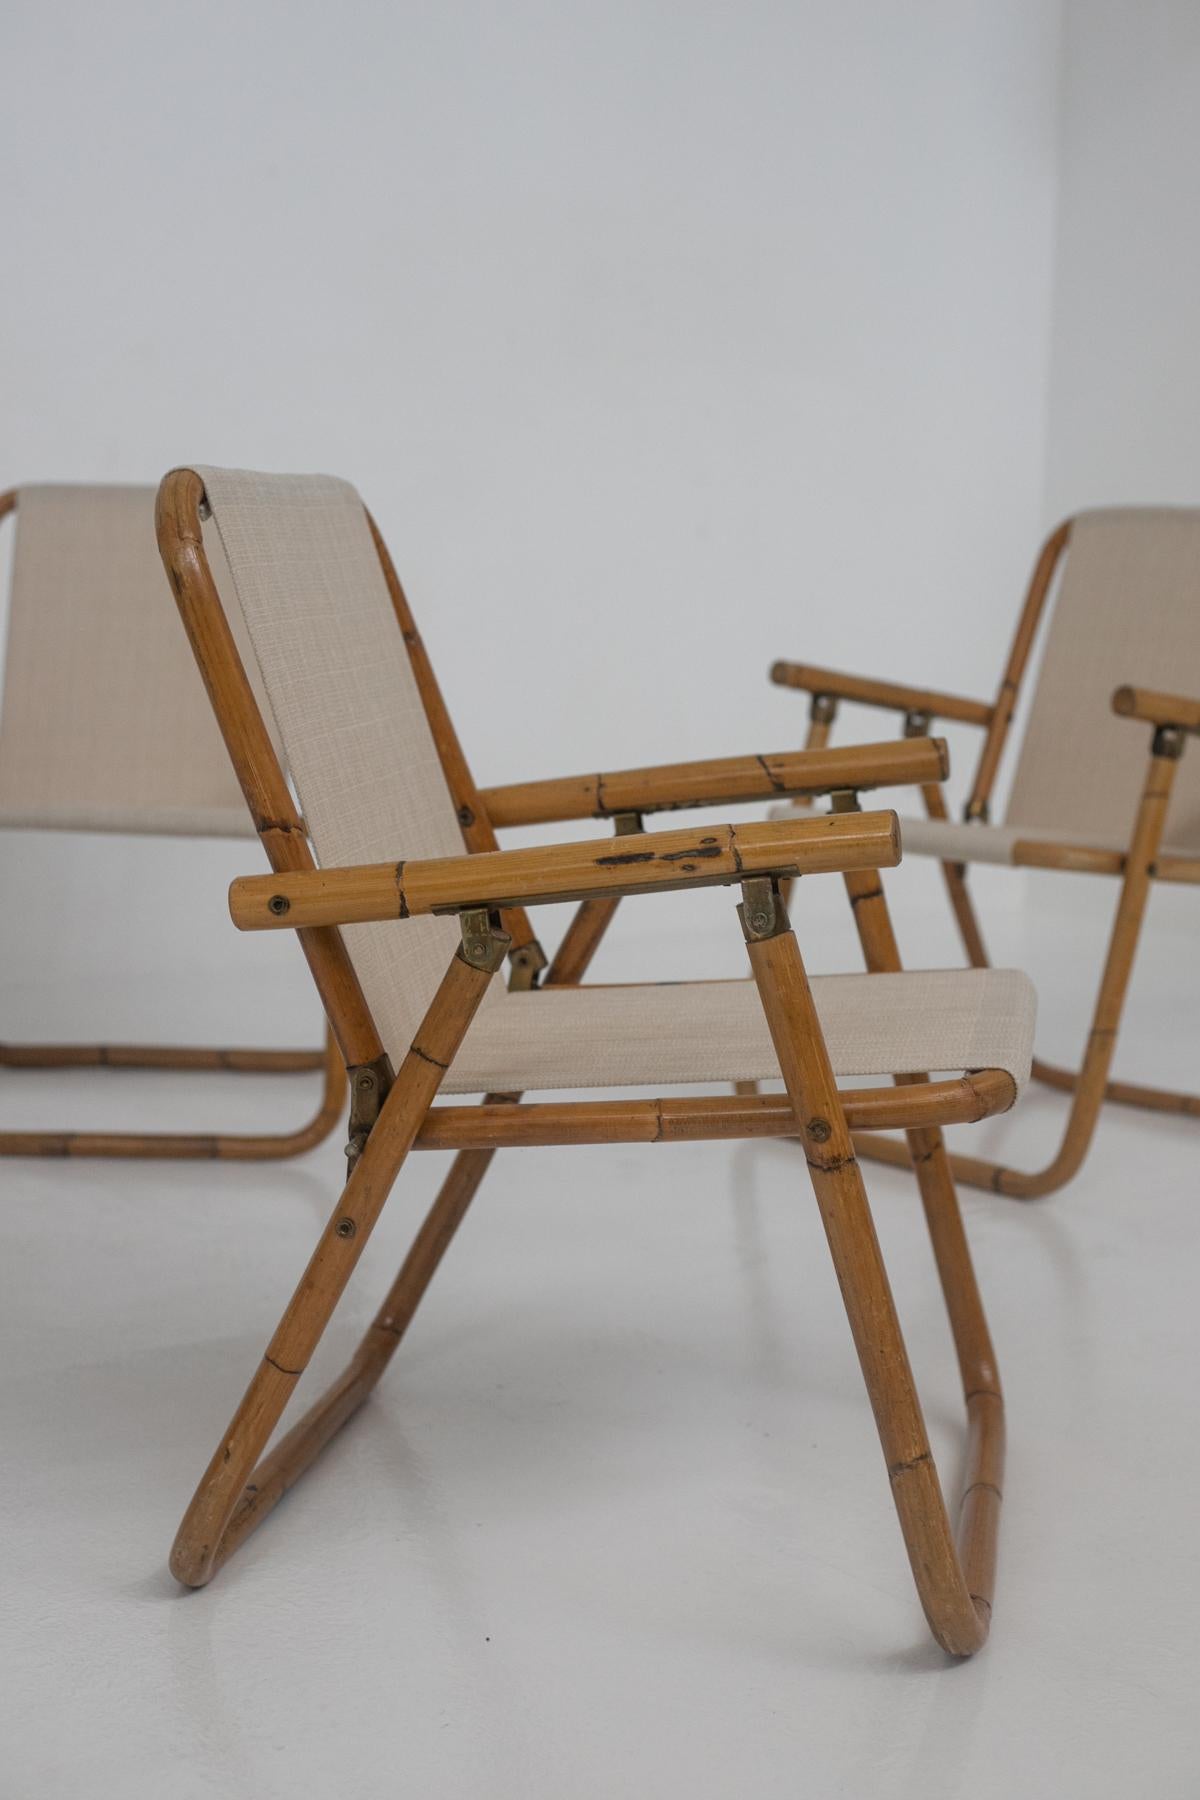 Set of four Italian chairs from the 1950s. The set is made of a very beautiful and elegant bamboo wood frame. The seat and backrest are made of a newly restored beige cotton canvas fabric. Note its brass fittings in excellent patina. The chairs are